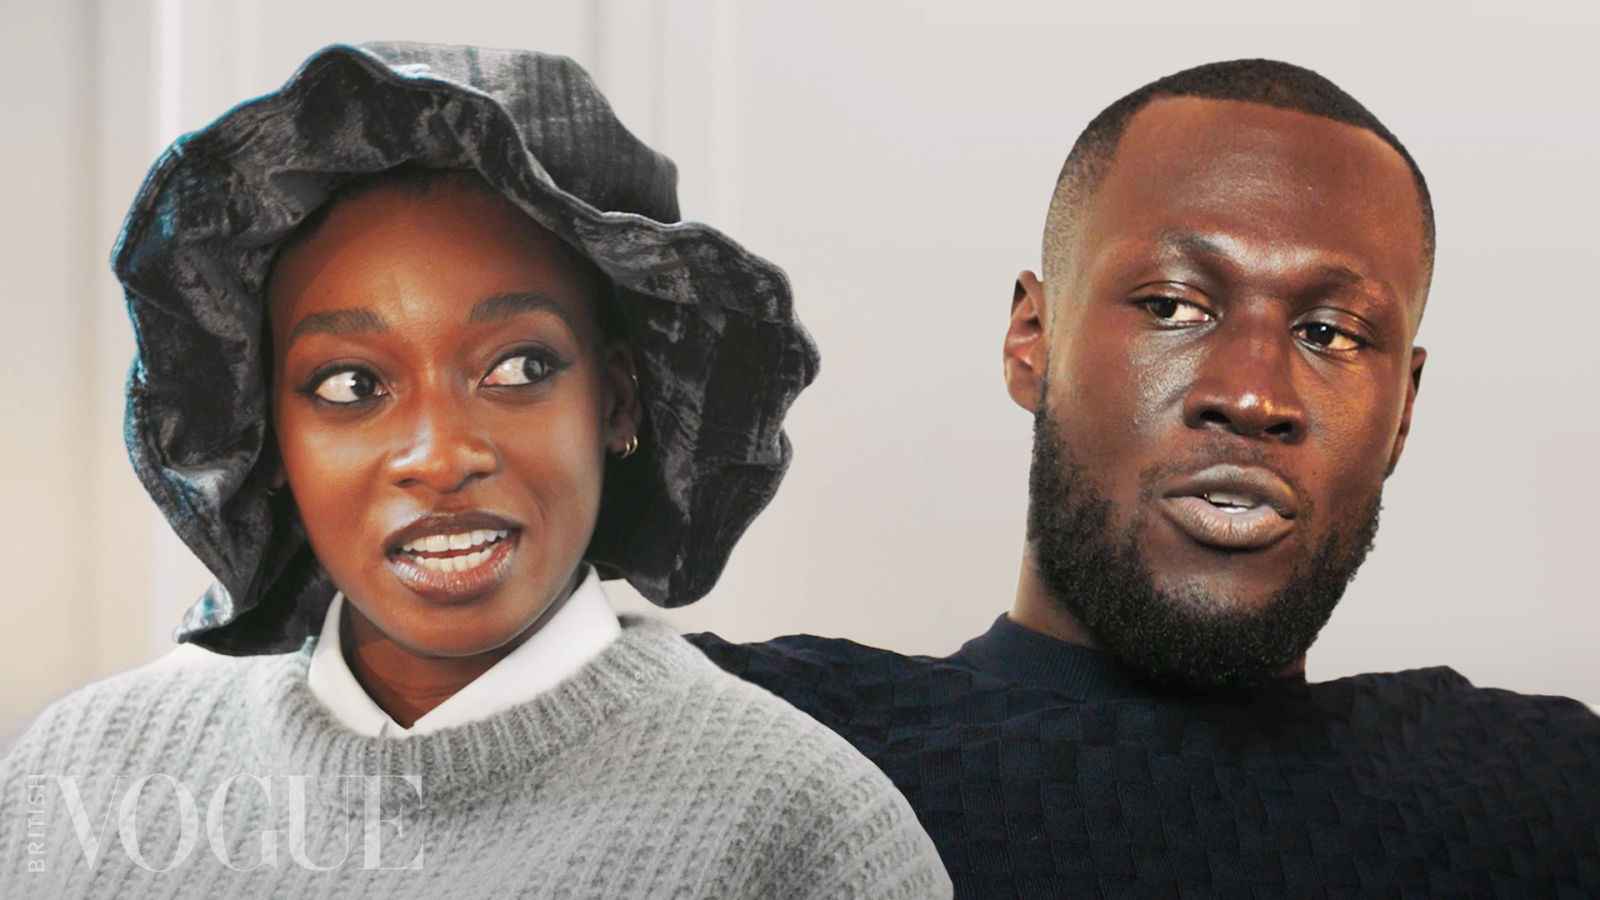 Stormzy & Little Simz on Music, Misconceptions & ‘Not Giving a F’ | In Conversation